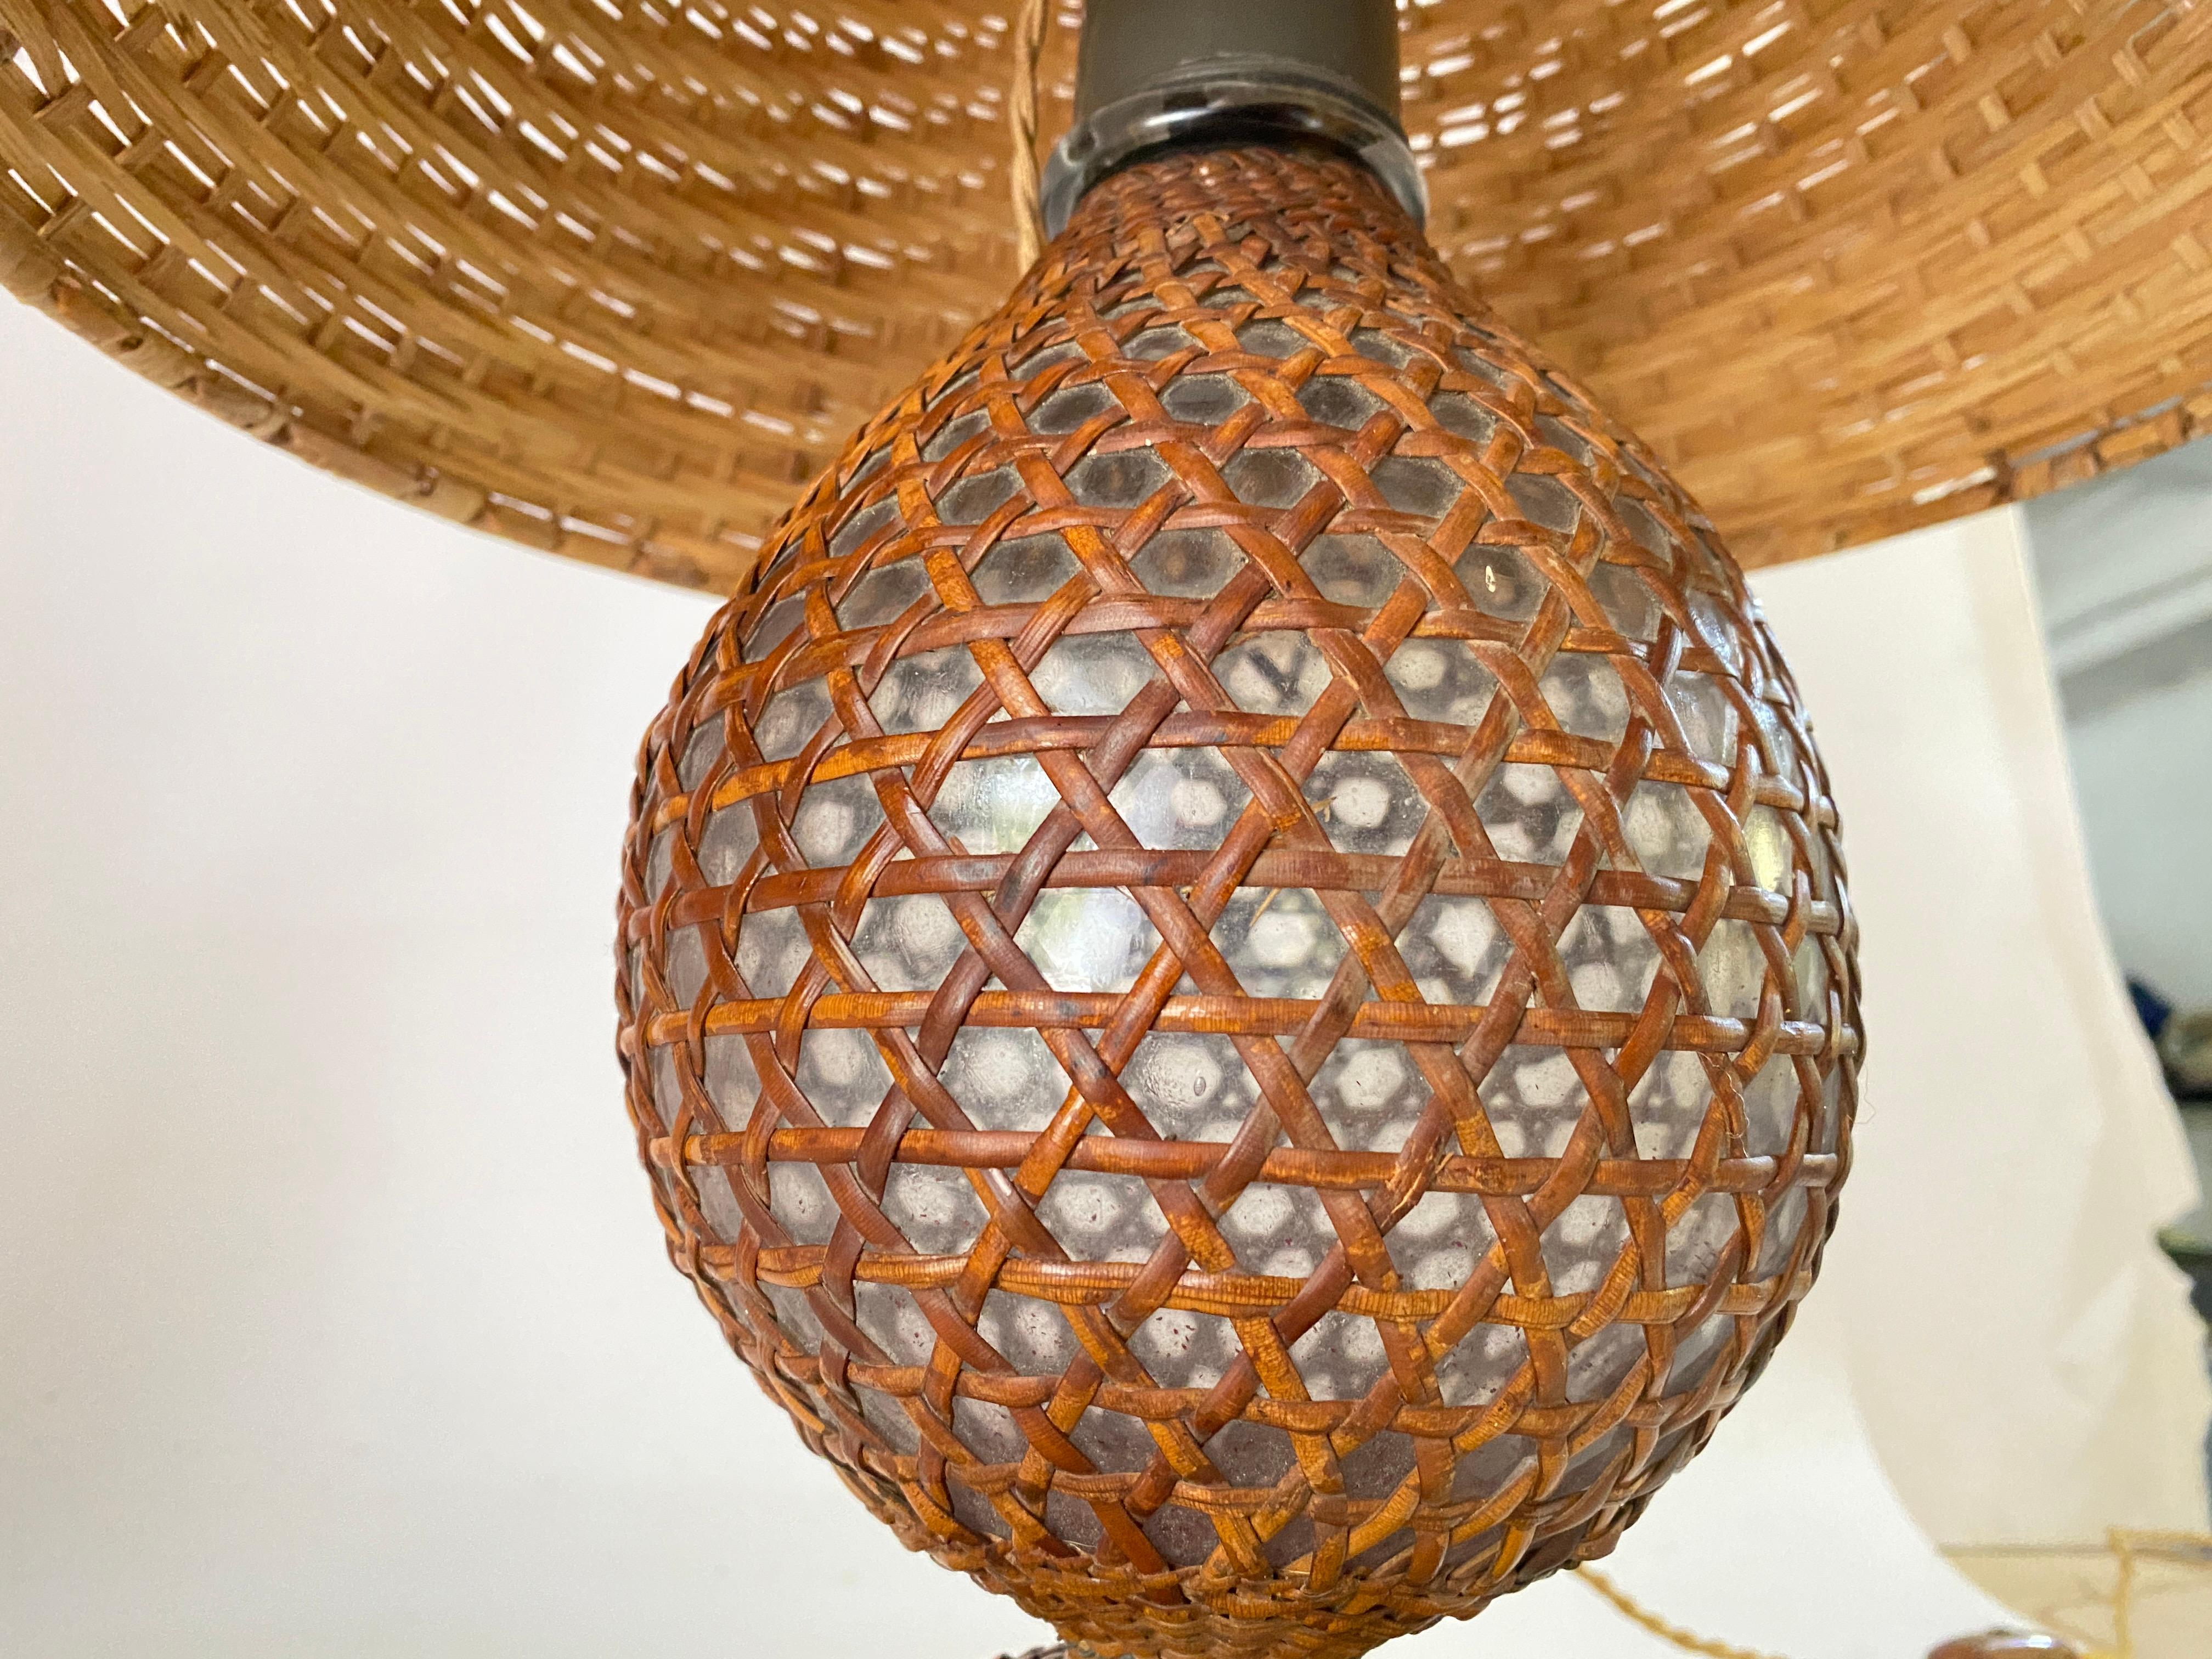 Glass and Rattan Table Lamp, Made in England, Brown Color, Circa 1970 For Sale 3